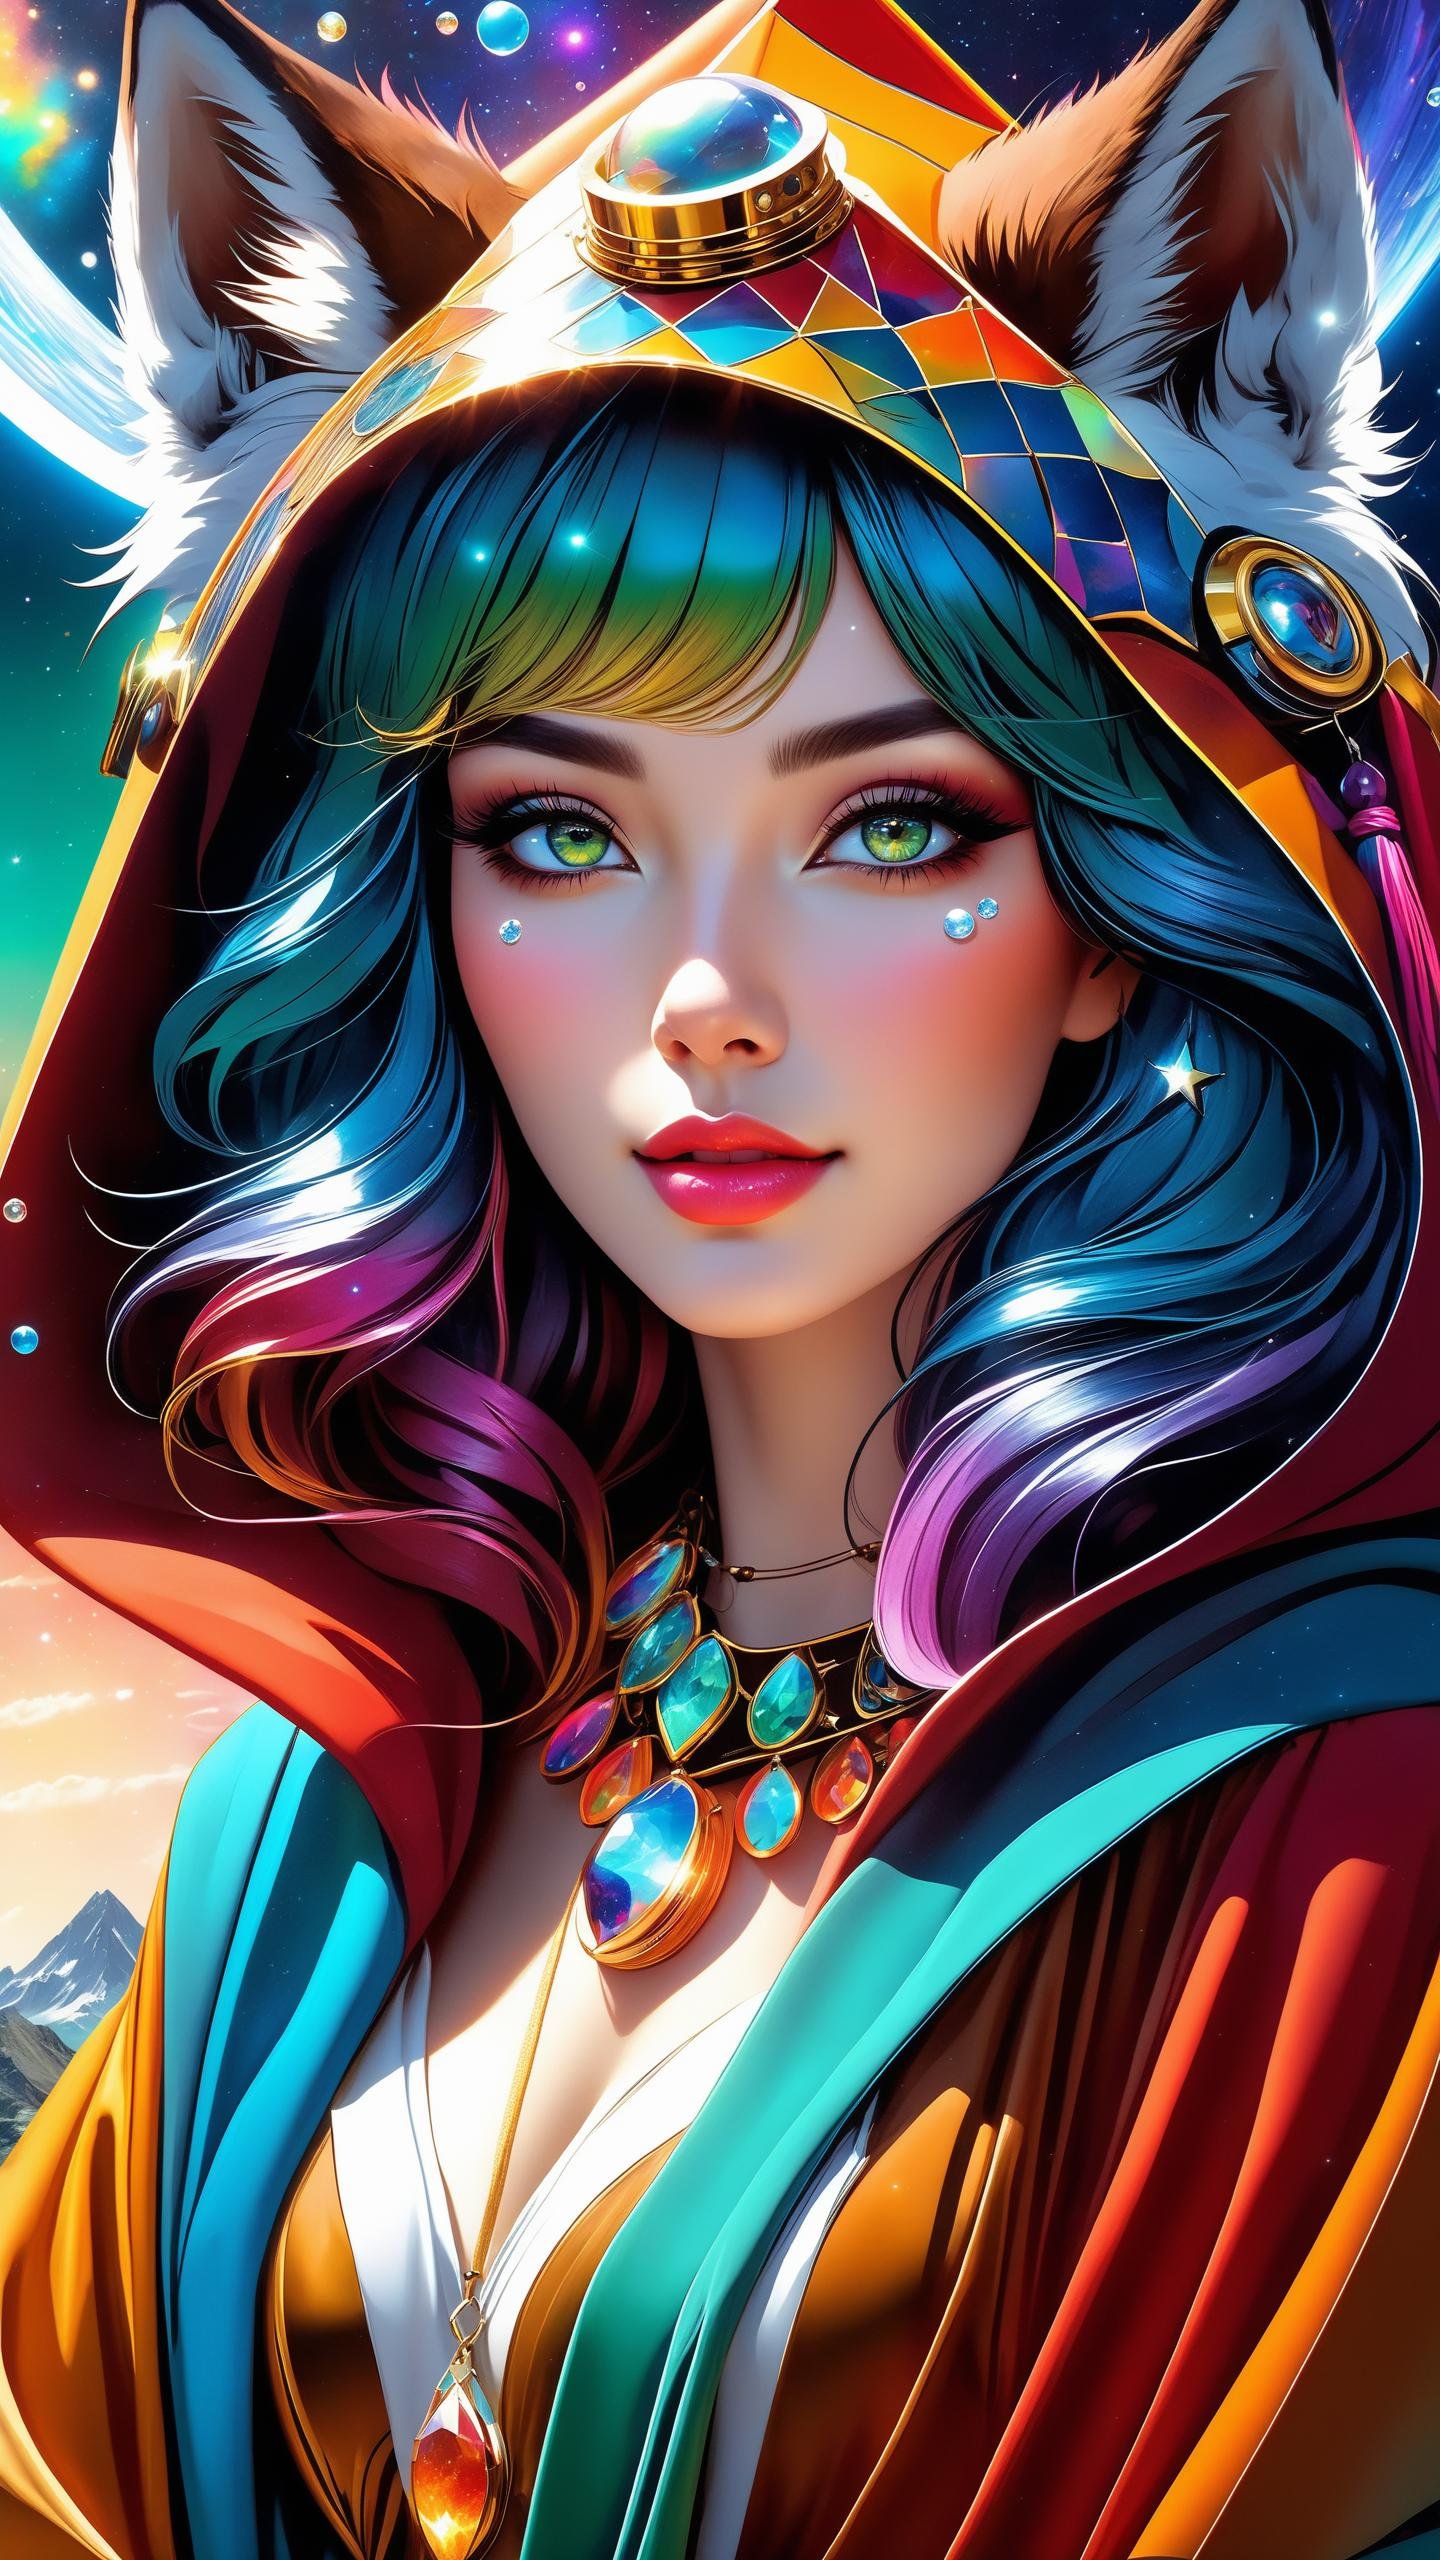 a beautiful girl, closed eyes, portrait, style-paintmagic, (((splash of paint))), (((colorful))), ((floating colorful paint)), goddess of death, Japanese mythology, (featuring mythical creatures), solar system, milky way, dream, fantasy, (abstract background:1.3), masterpiece, ultra realistic, 32k, extremely detailed CG unity 8k wallpaper, best quality, masterpiece, best quality, ultra high res, extremely detailed, (psychedelic art:1.4), woman, veil, visually stunning, beautiful, award-winning illustration, cosmic space background, ethereal atmosphere, (dark glass skin, diamond body, multi colored eyes:1.3), dark brown eyes, chestnut hair, mutton chops, (cyberpunk city:1.2), portrait, elegant hat, half shot, detailed background, detailed face, ChronomancyAI, (chronomancy theme:1.1), bubble-wizard, orange sorcerer robes, surrounded by light green bubbles, rainbow, floating orbs, large bubbles, floating sparkling particles, transclucent, glowing bubbles, swirling bubbles, graceful, bubbles in background, intricate patterns, starry sky, magical atmosphere, space, Egypt futuristic, (by Enki Bilal , methurlant), surreal, (hyper realistic:1), ((upper body selfie, happy)), masterpiece, best quality, ultra-detailed, solo, outdoors, (night), mountains, nature, (stars, moon) cheerful, happy, backpack, sleeping bag, camping stove, water bottle, mountain boots, gloves, sweater, hat, flashlight, forest, rocks, river, wood, smoke, shadows, contrast, clear sky, analog style, (warm hue, warm tone), methurlant Dean Cornwell, A portrait of a female cyborg , organic armor, silver, (intricate, atmospheric, surreal, gritty, cinematic, stylized, contrast, comic, eerie, stylized, dystopian), (high contrast:1.1), (Reflected light:1.2), ultra detailed, (glass skin:1.3), (surrealism:1.1), (disturbing:1.1), (cottagecore), (geometric:1.2), (futurism:1.2), impressionist, (detailed), (majestic:1.2), (breathtaking), (suggestive:1.3), (depressing:0.9), (cute:1.4), (enticing:1.4), (irresistible:1.4), disturbing, (fascinating:1.2), (magnetic:1.2), (color palette crimson:1.1) (color palette cerulean:0.8), furry girl, anime furry women, ((best quality)), ((masterpiece)), ((realistic)), (detailed), portrait, close up, young female, RAW photo, uhd, dslr, rainbow hair, high quality, realistic, photo realistic, dreamlikeart, lens flare, upper body, looking at viewer, animal focus, furry, wolf fursuit, close up, detailed body, goddess body, cute, kawaii, lovely, fur, fur head, wolf head, narrow waist, wolf ears, chocker with rope, blush, paw, paw shoes, rainbow clothes, stunning gradient colors, no watermark signature, detailed background, woods, small lake with island, insanely detailed, ((masterpiece)), absurdres, HDR, (((spread legs, open legs, sitting, open arms))), latex clothes, latex dress, waning moon